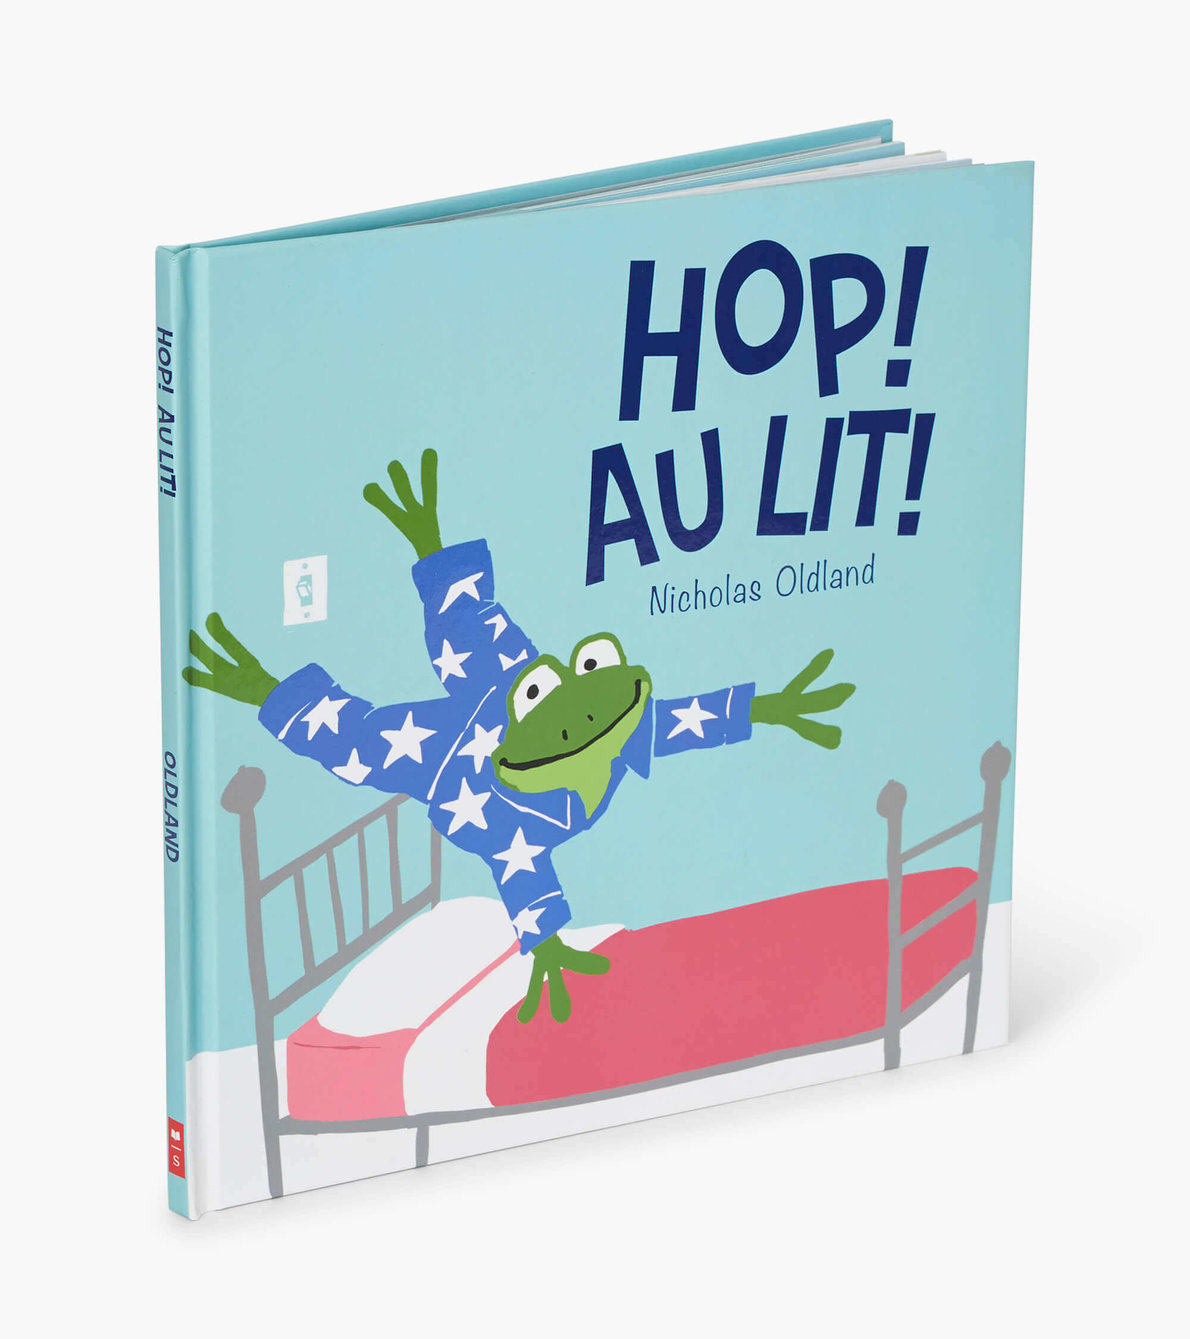 View larger image of "Hop ! Au lit !" French Children's Book